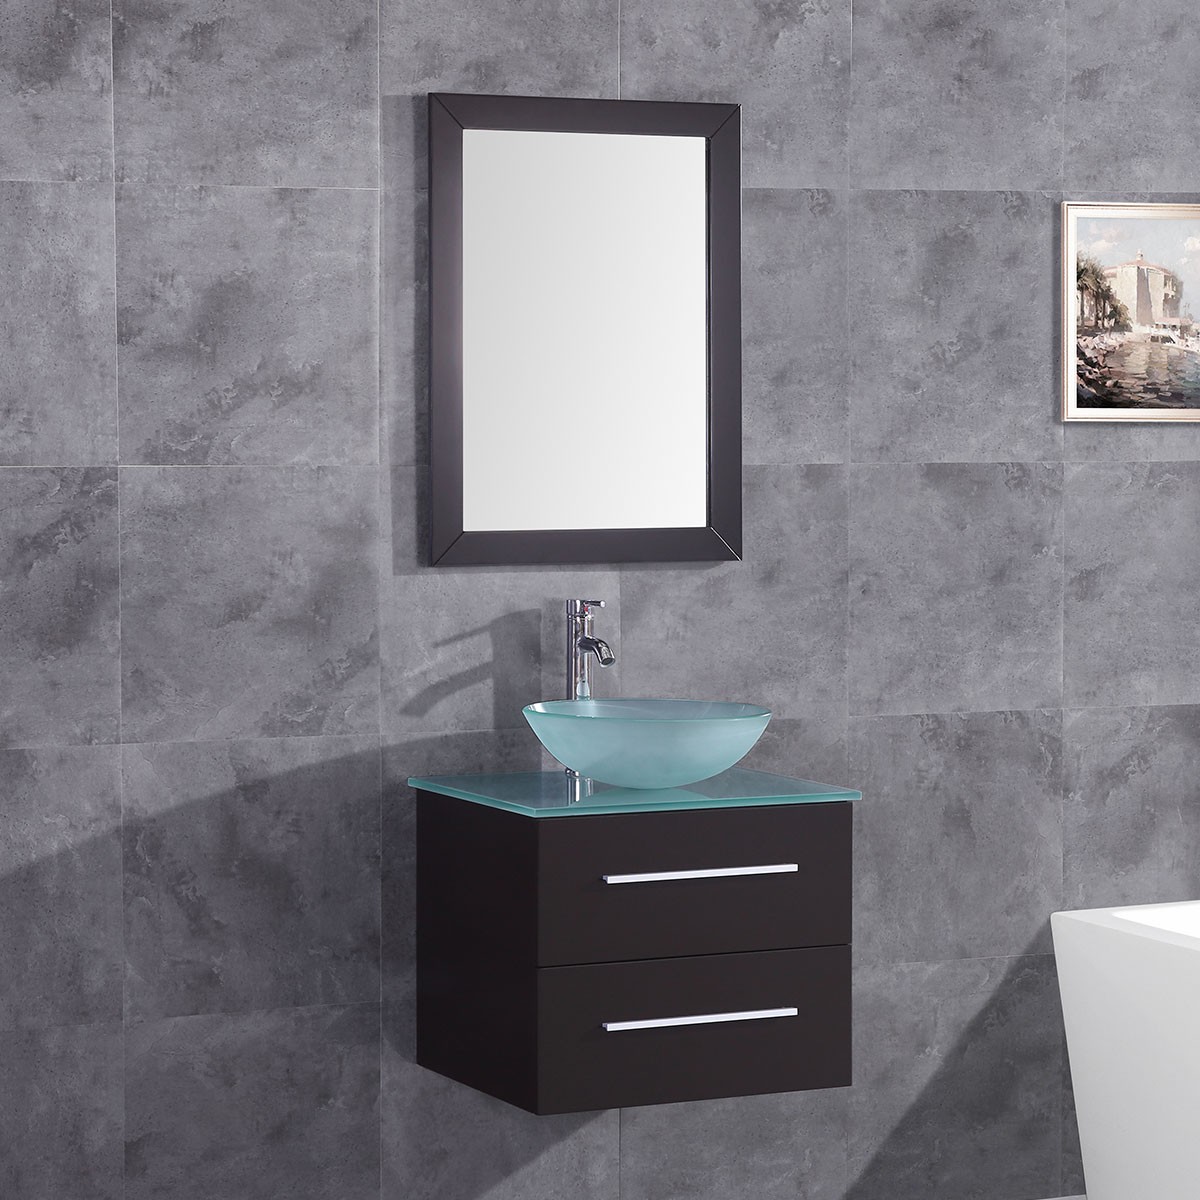 24 In. Plywood Vanity Set with Basin and Mirror (DK-T9190-SET)